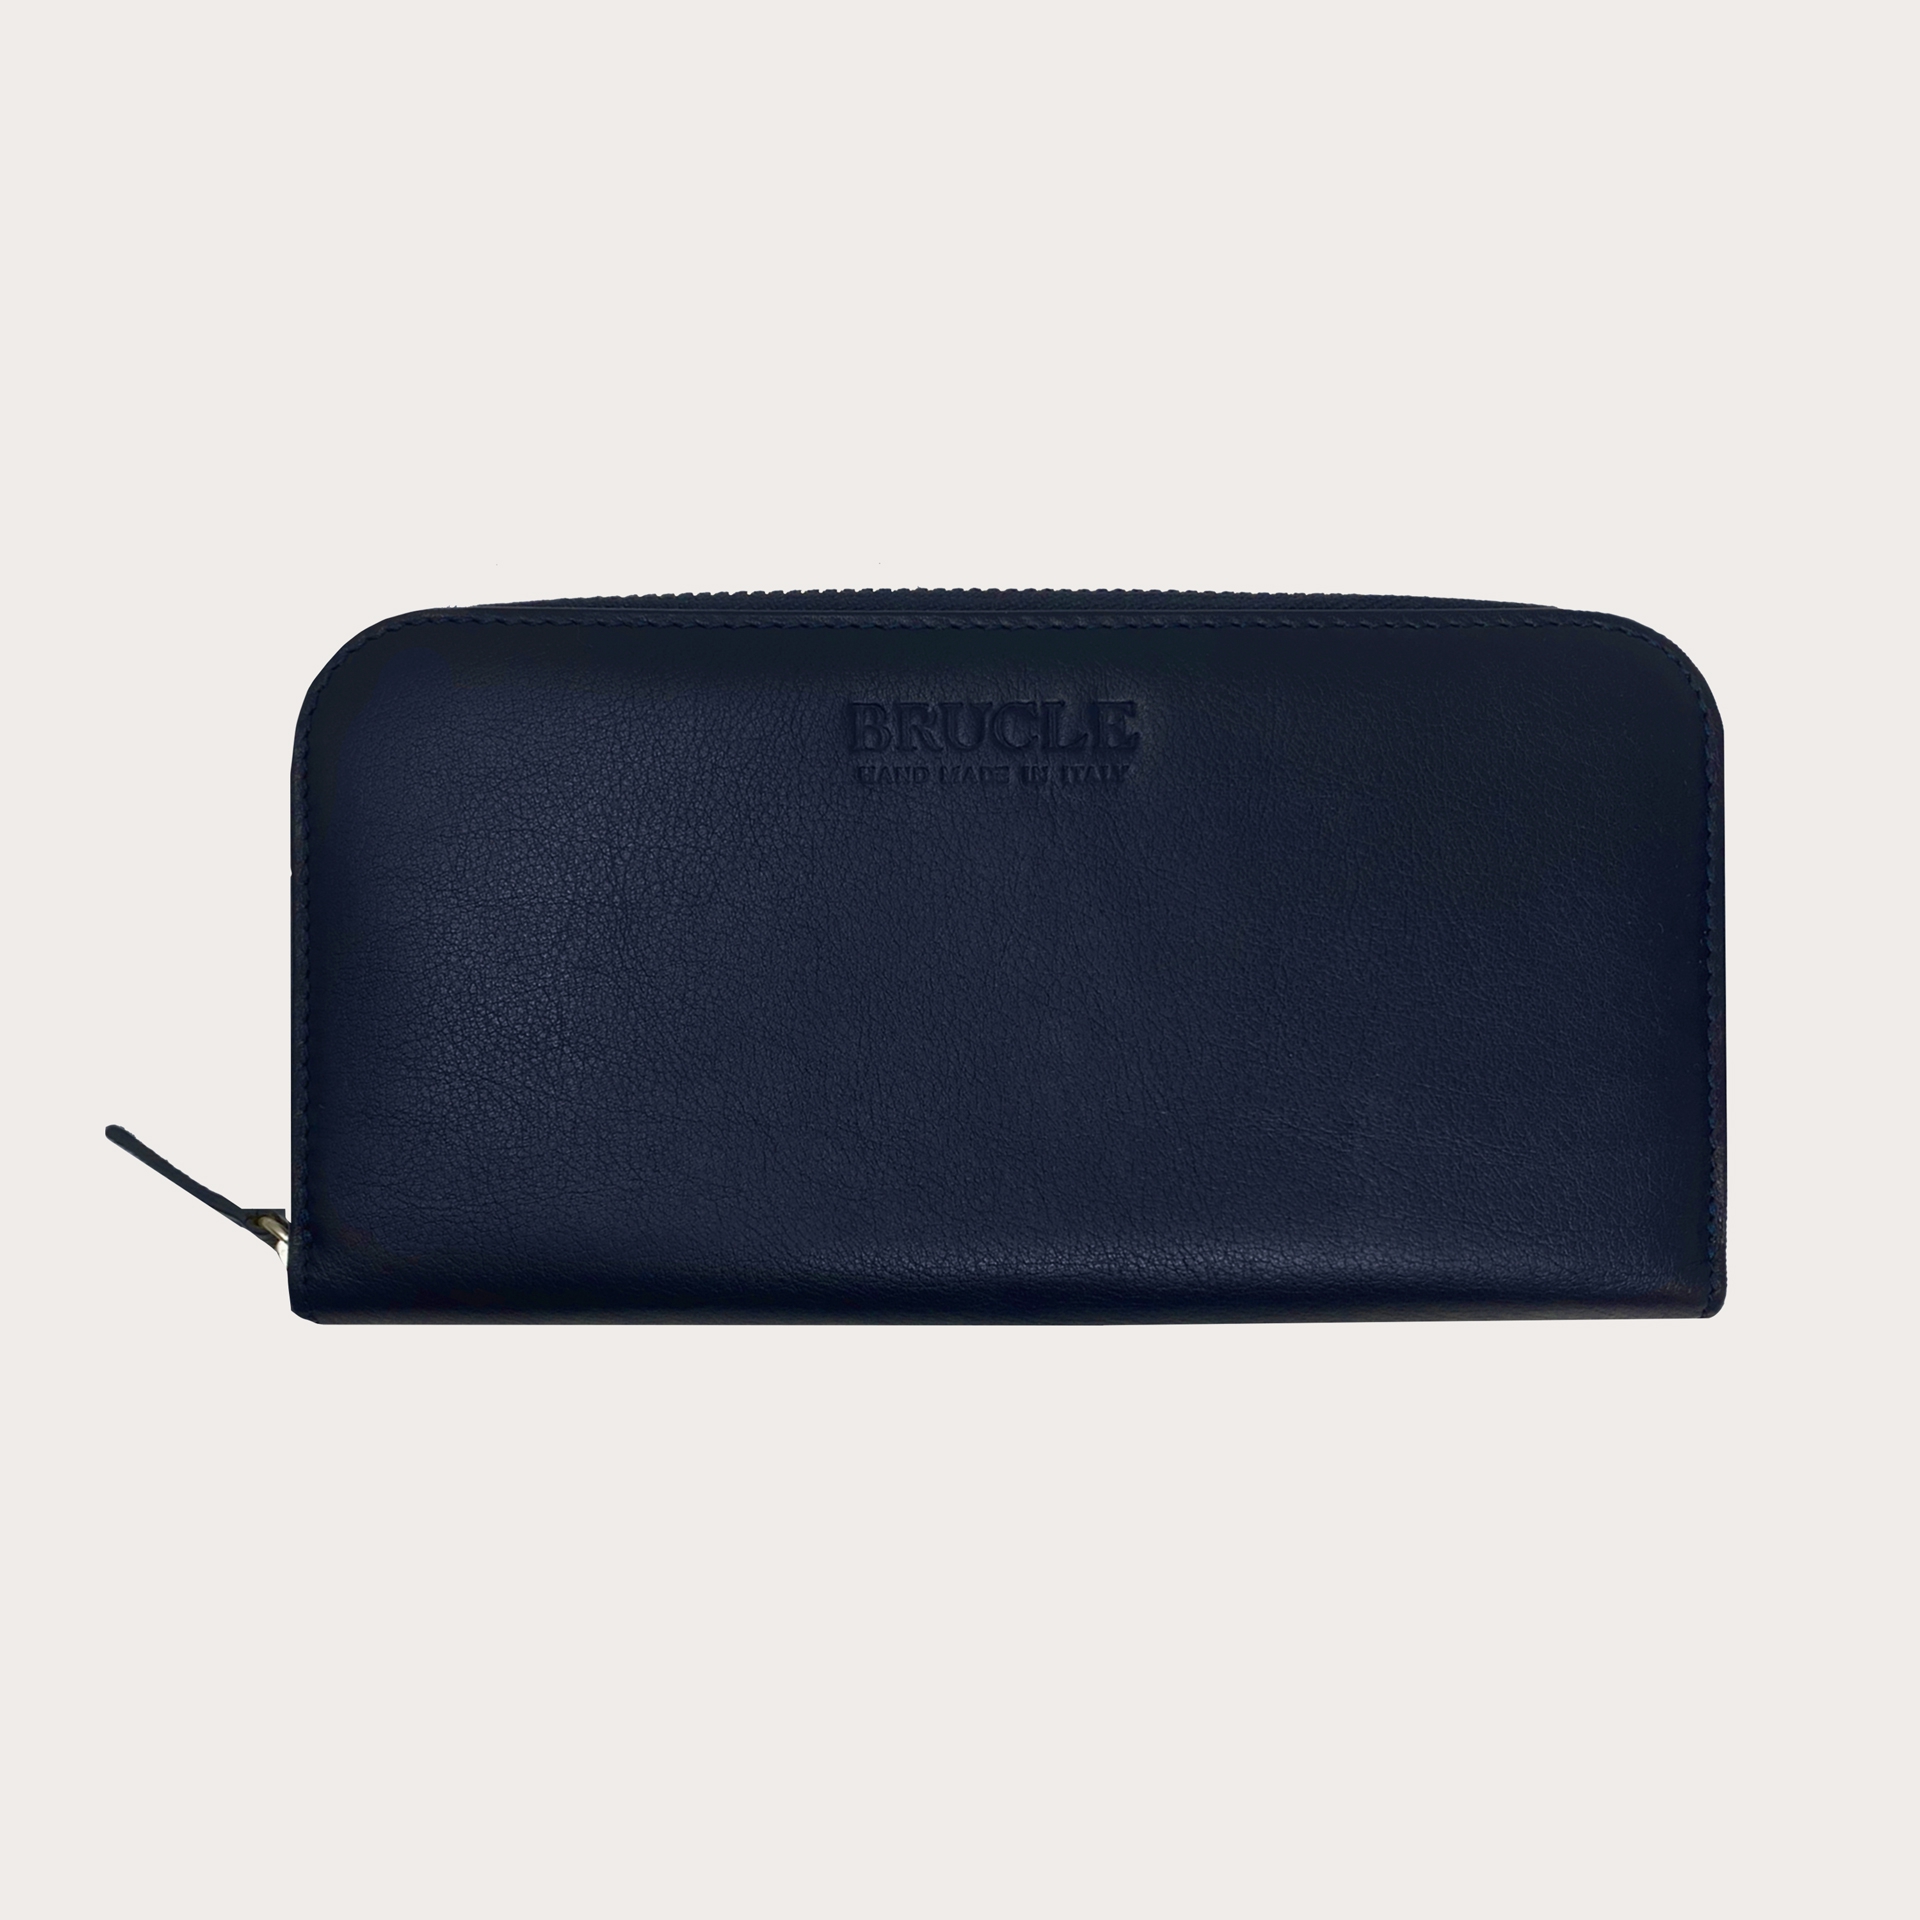 BRUCLE Classic zip around leather wallet, blue